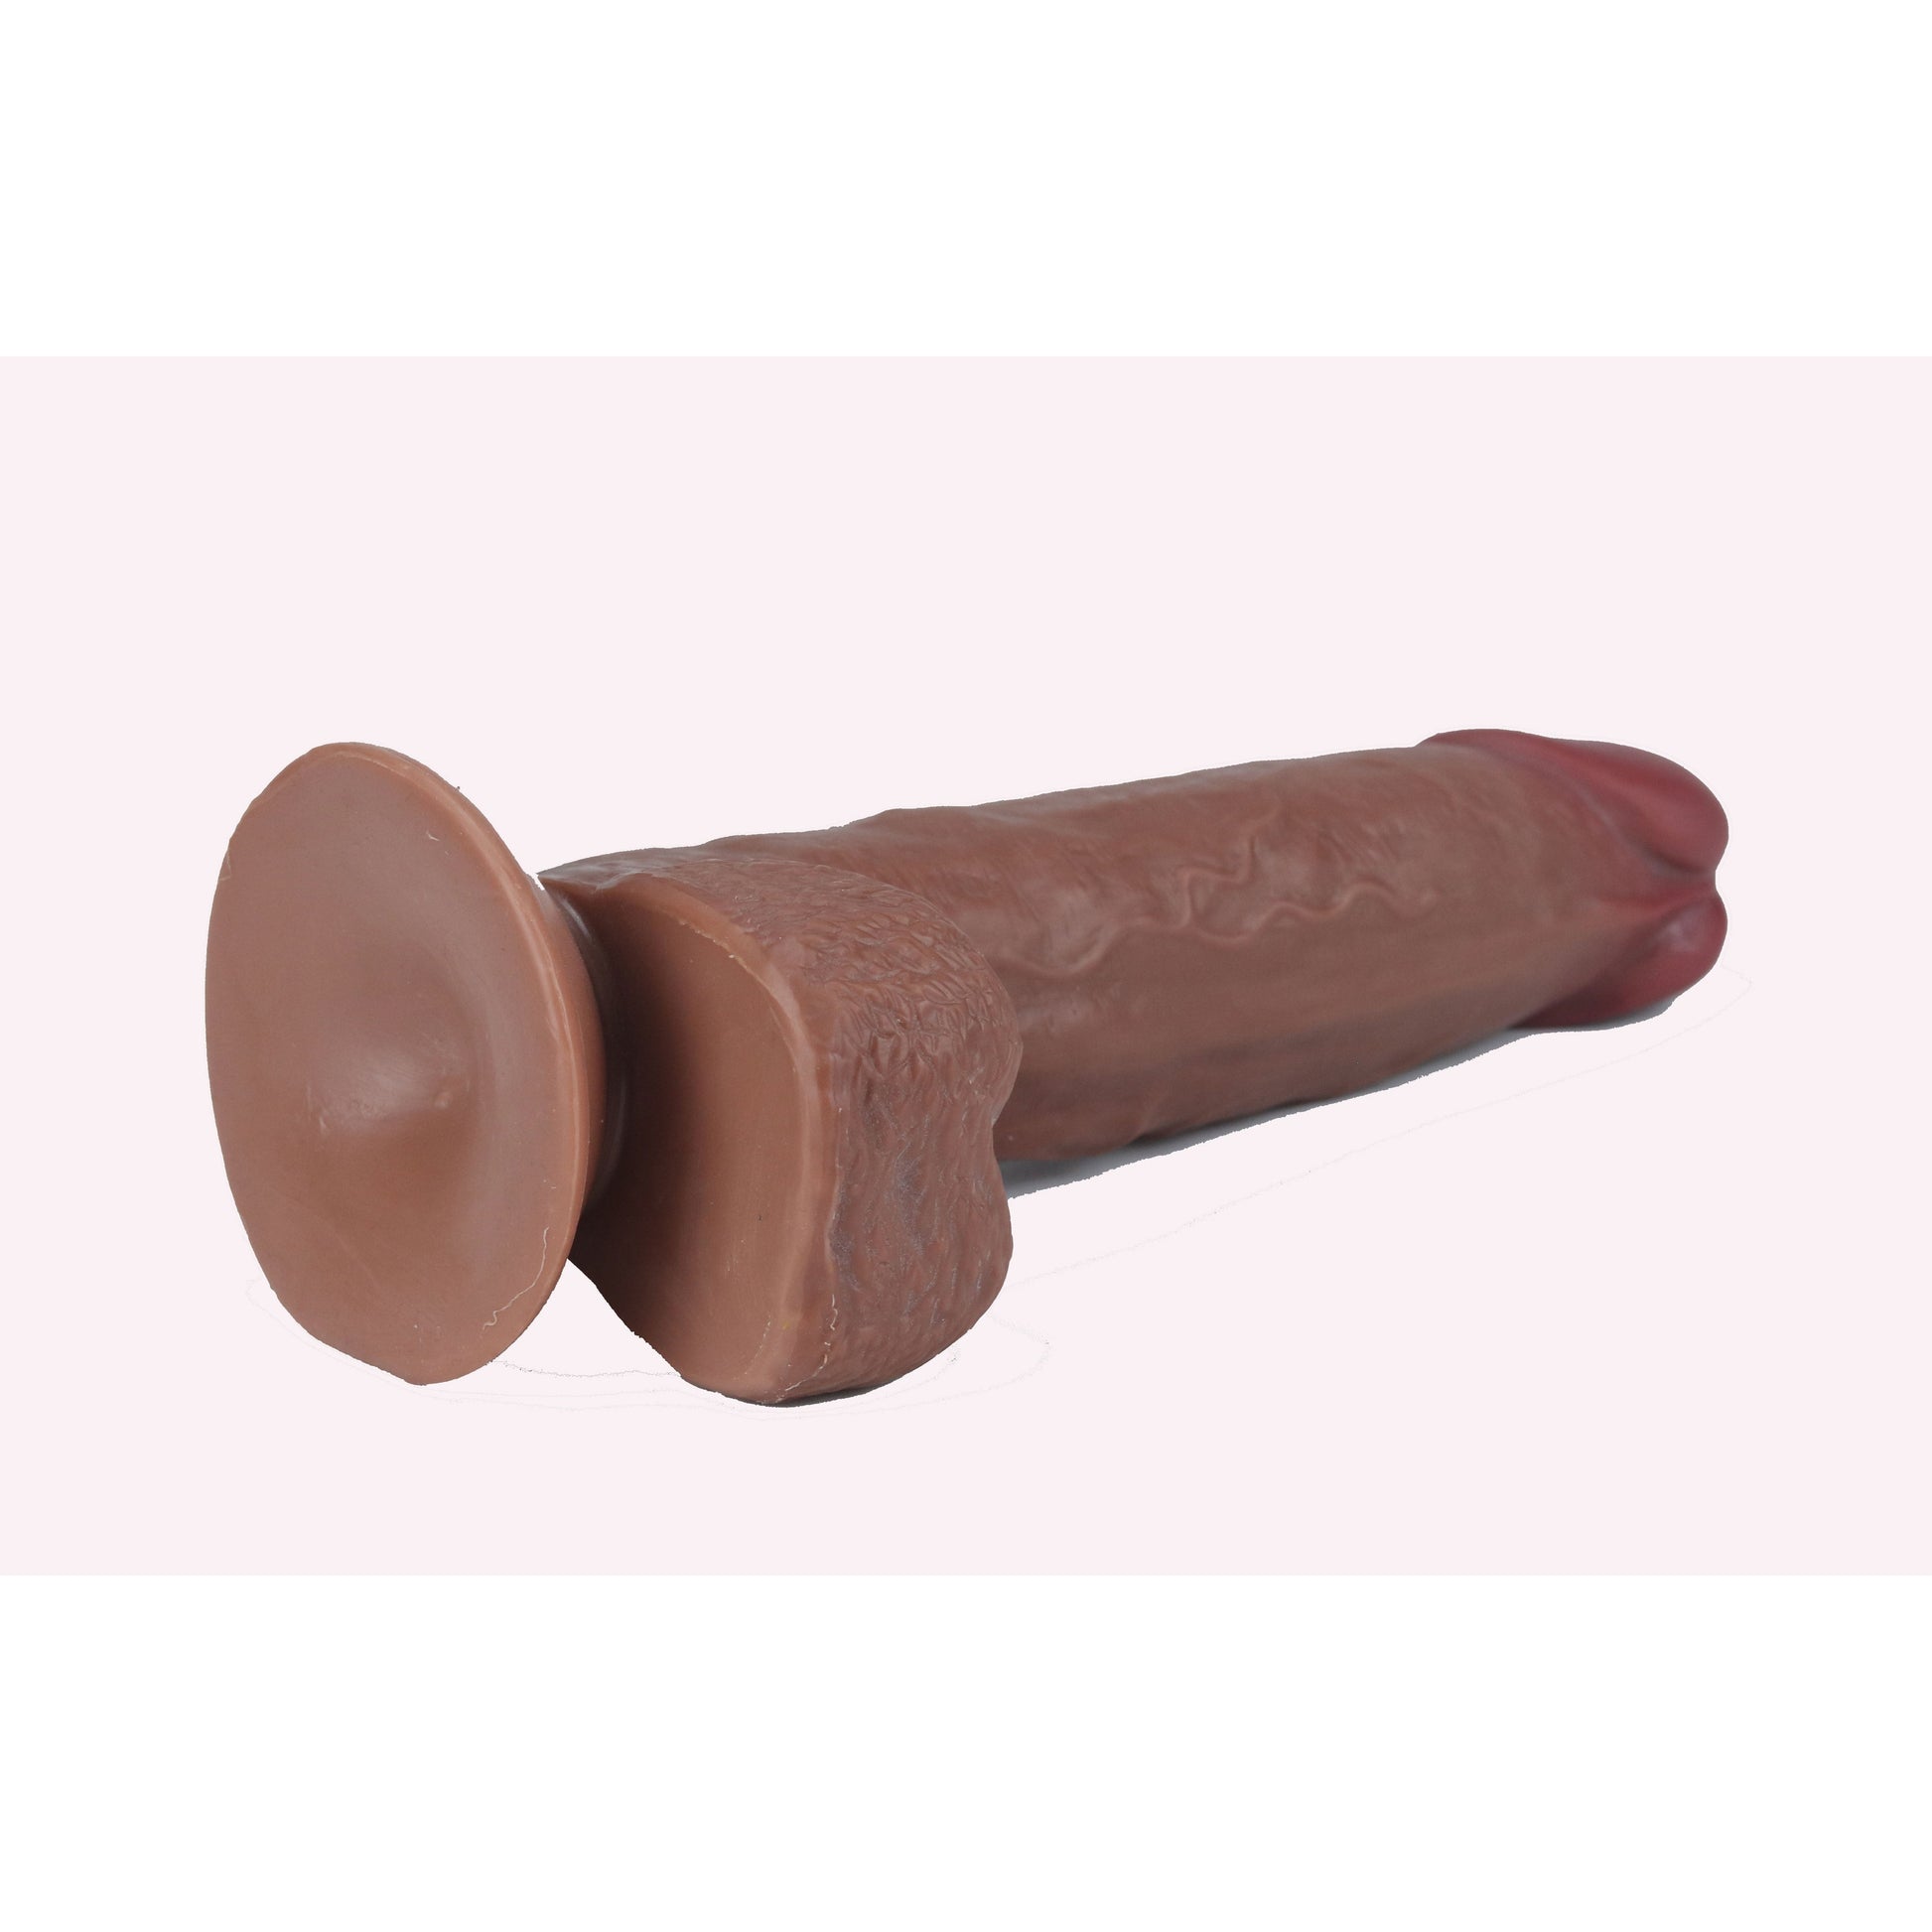 Get Lucky 7.5 Inch Real Skin Dong - Light Brown